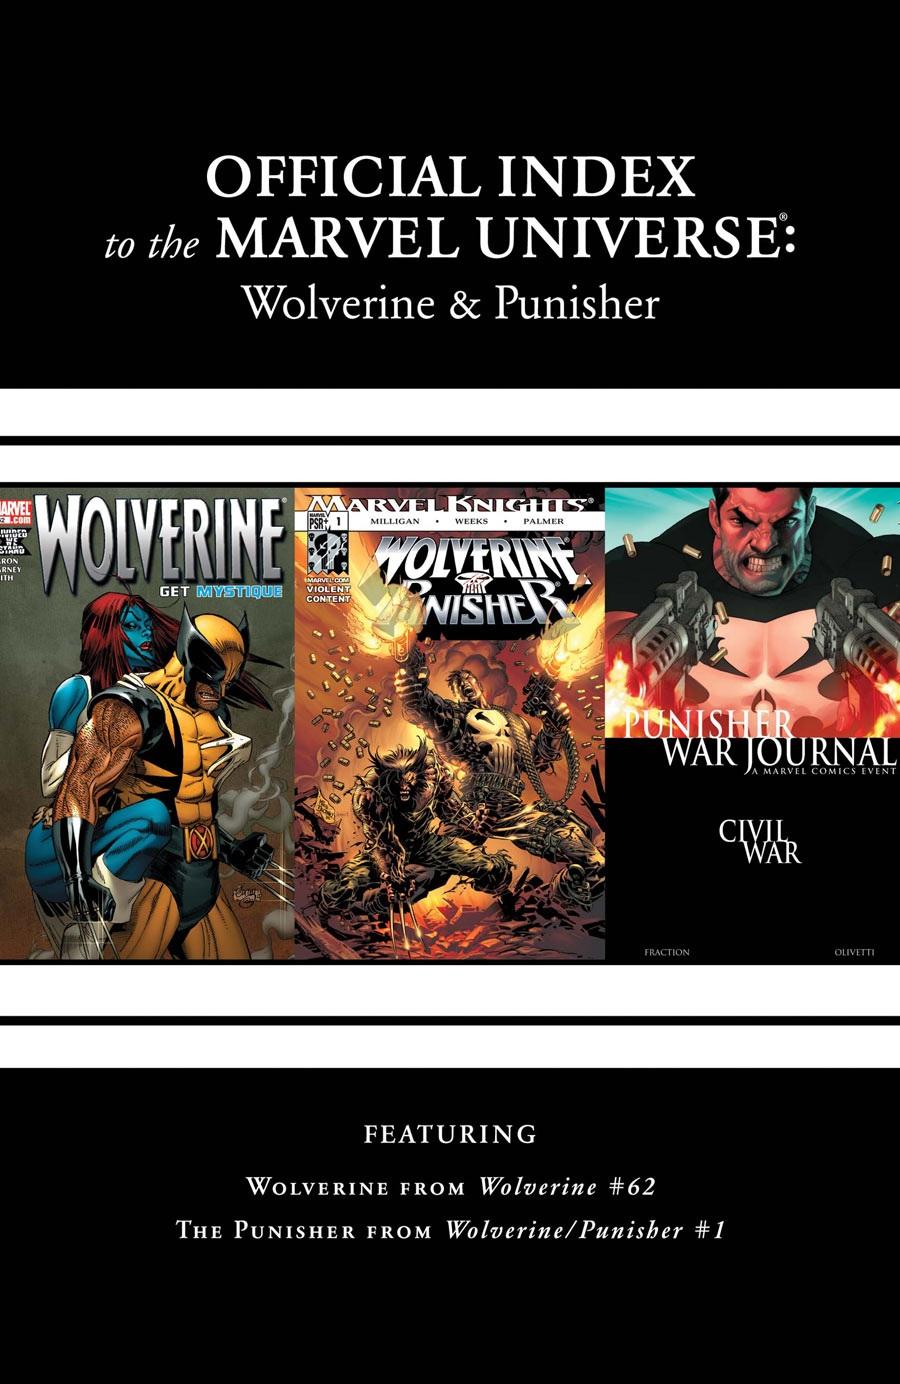 Wolverine, Punisher & Ghost Rider: Official Index to the Marvel Universe Vol. 1 #7